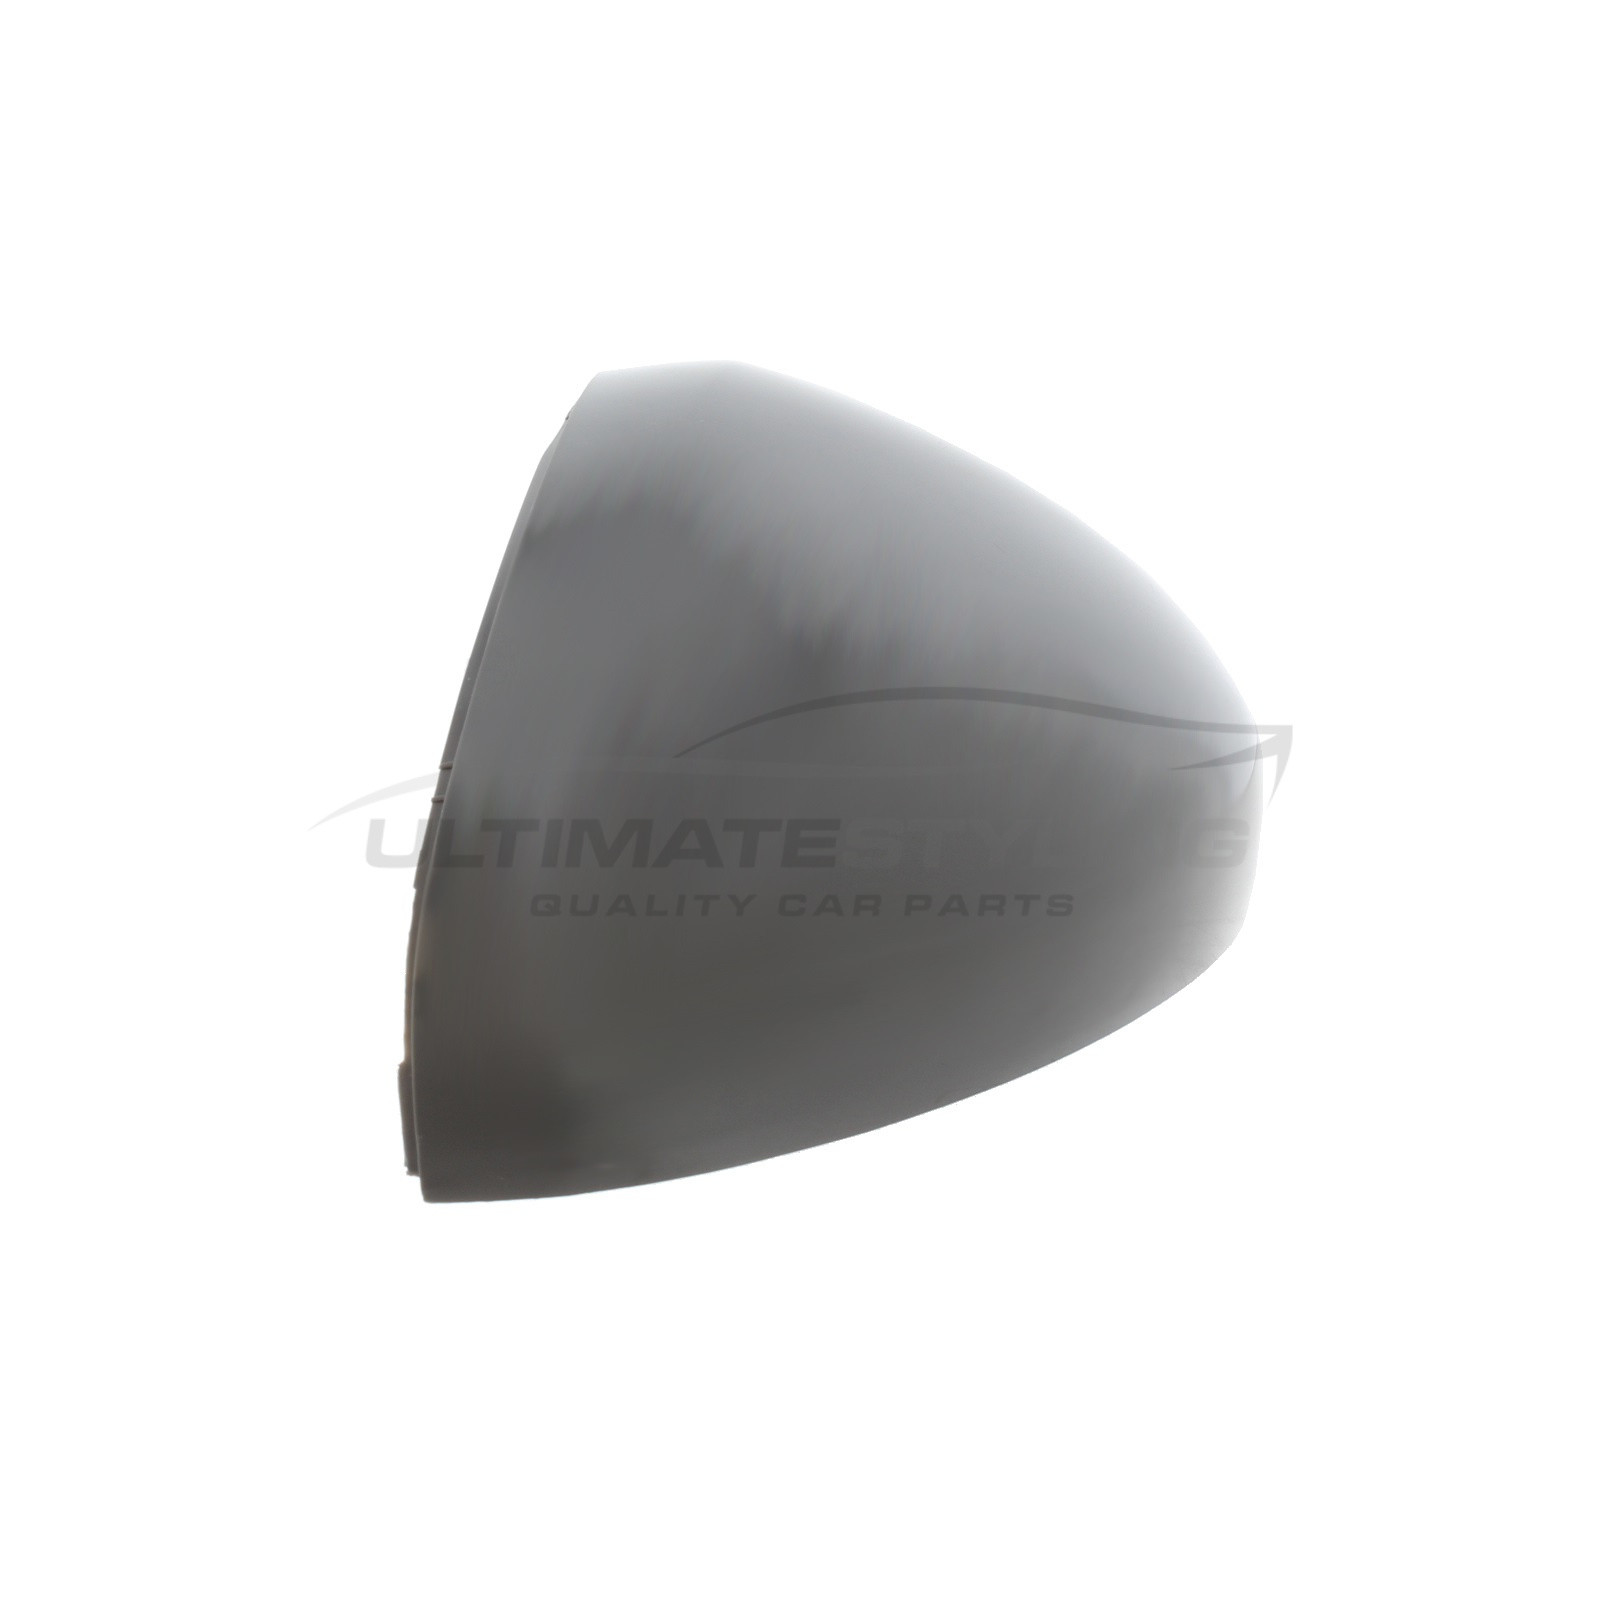 FOR CITROEN C3 10-16, C5 08-17, DS3 10-16 WING MIRROR COVER CAP CHROME  RIGHT O/S